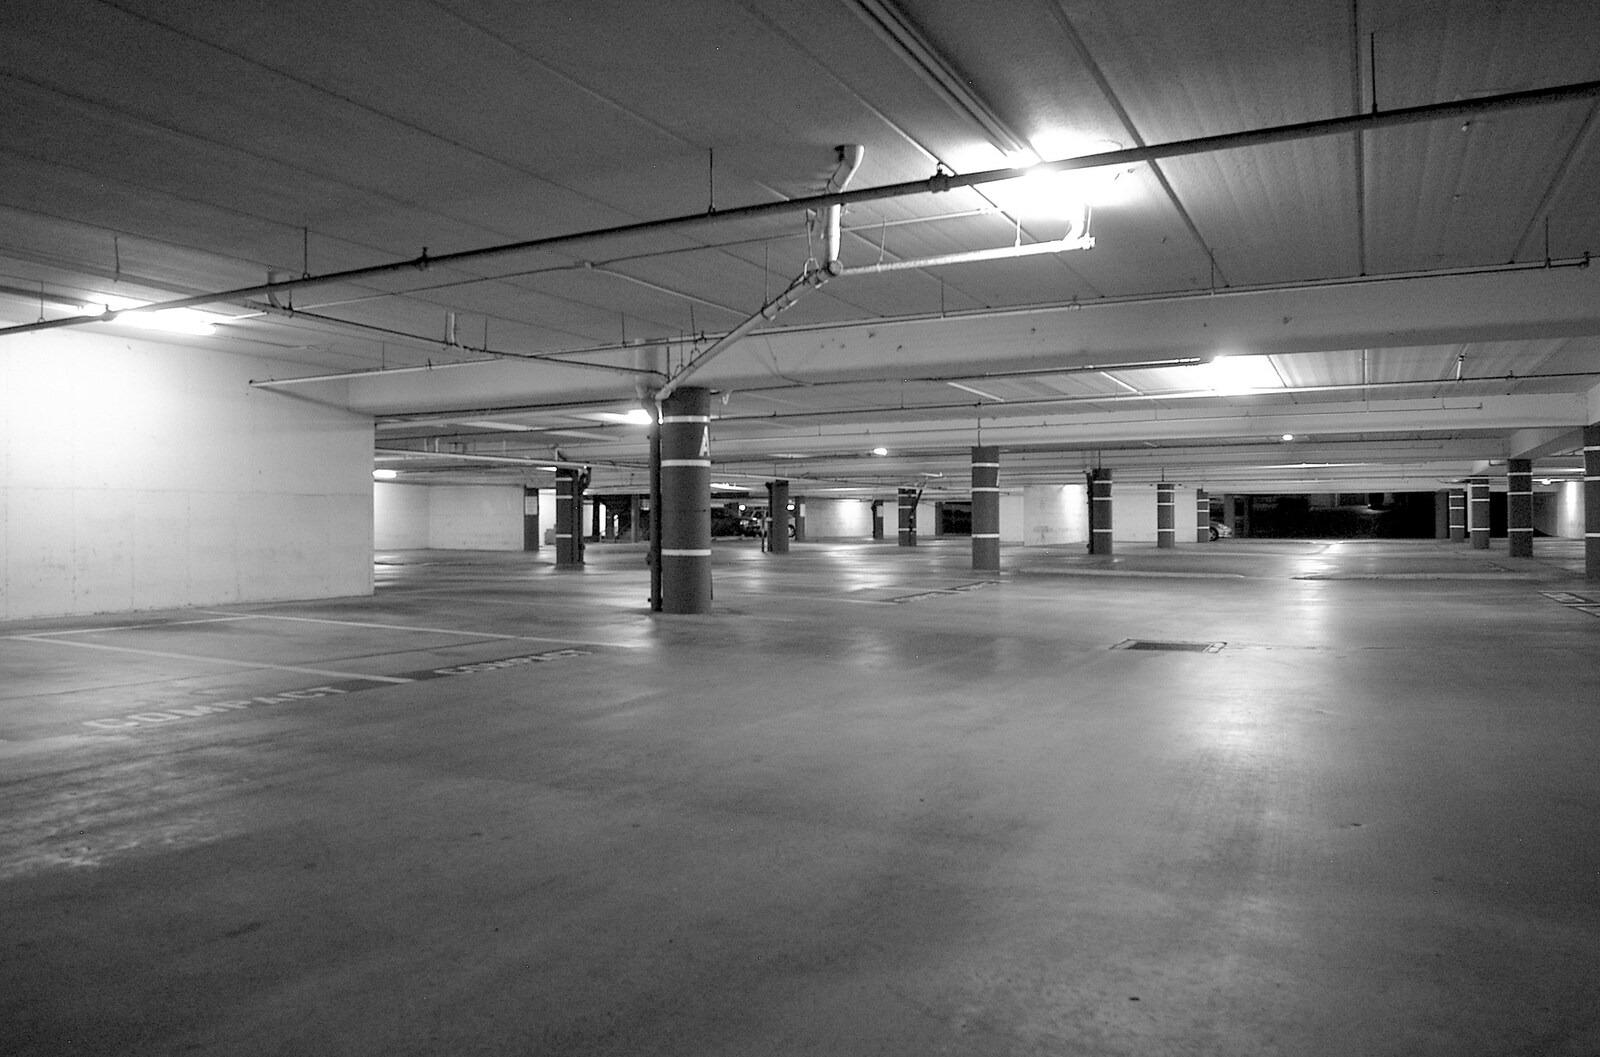 Car park in black and white from San Diego Misc: Beaches, Car Parks and Airports, San Diego, California, US - 4th March 2006